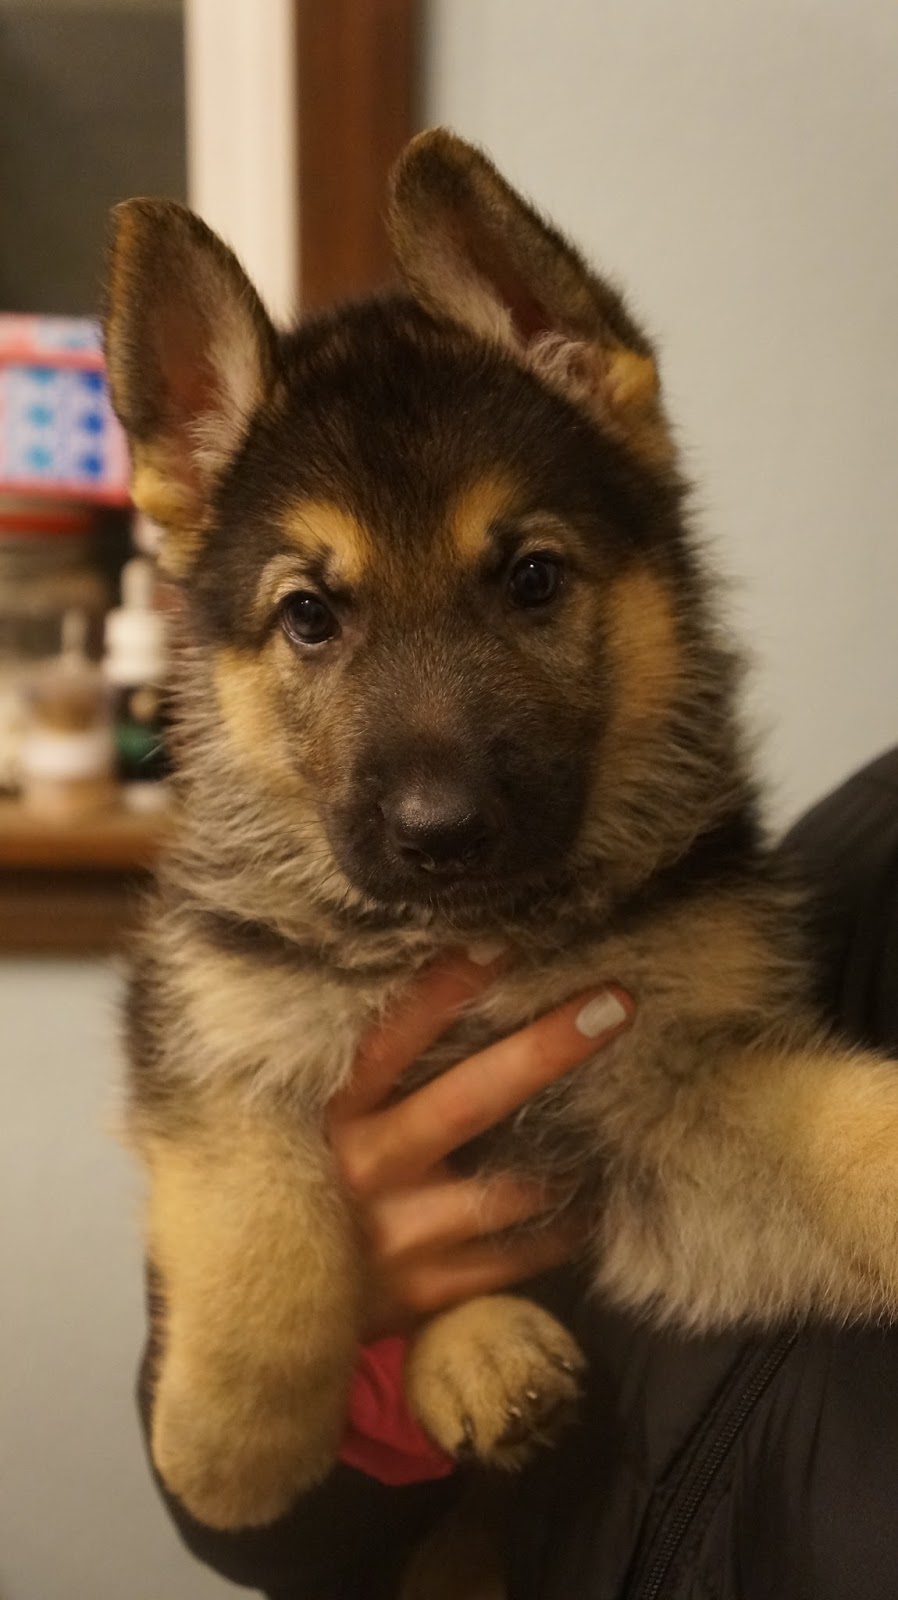 Akc German Shepherd Puppies North Idaho Coeur D Alene Post Falls Area 7 Weeks Old Almost Ready To Go Today Males And Female Puppies Black Tan R